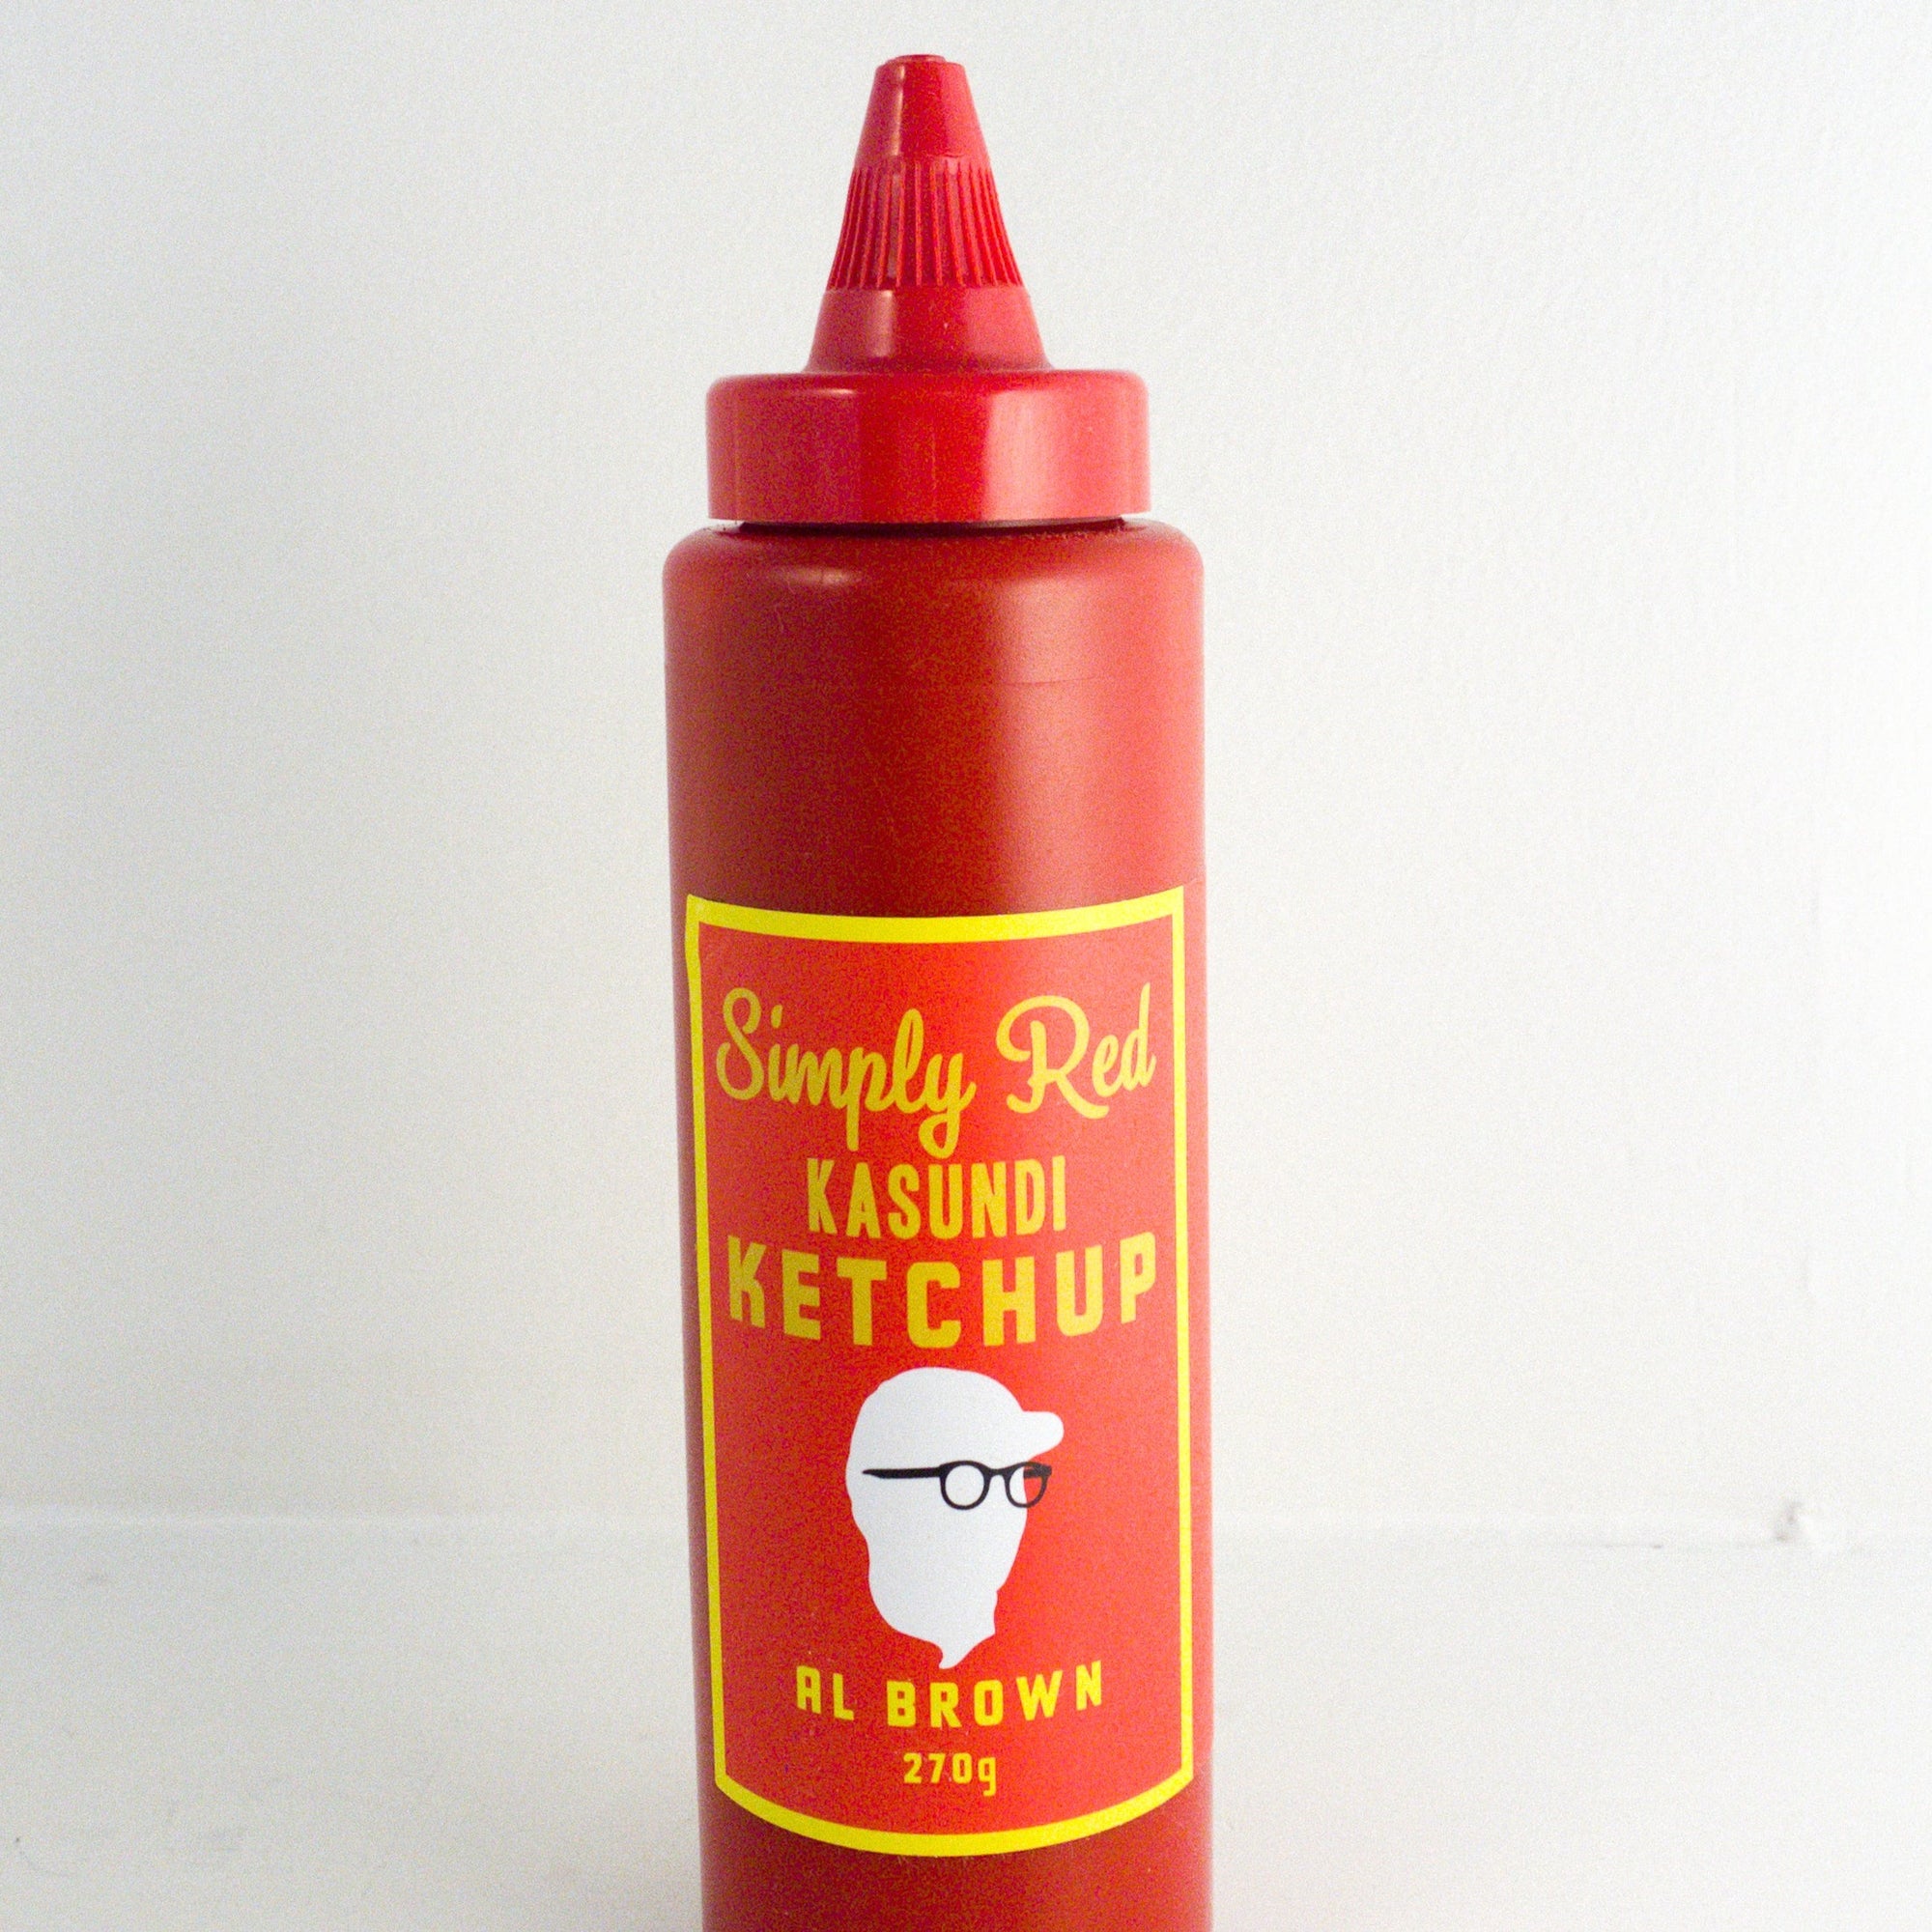 image of a red bottle of tomato ketchup with yellow text 